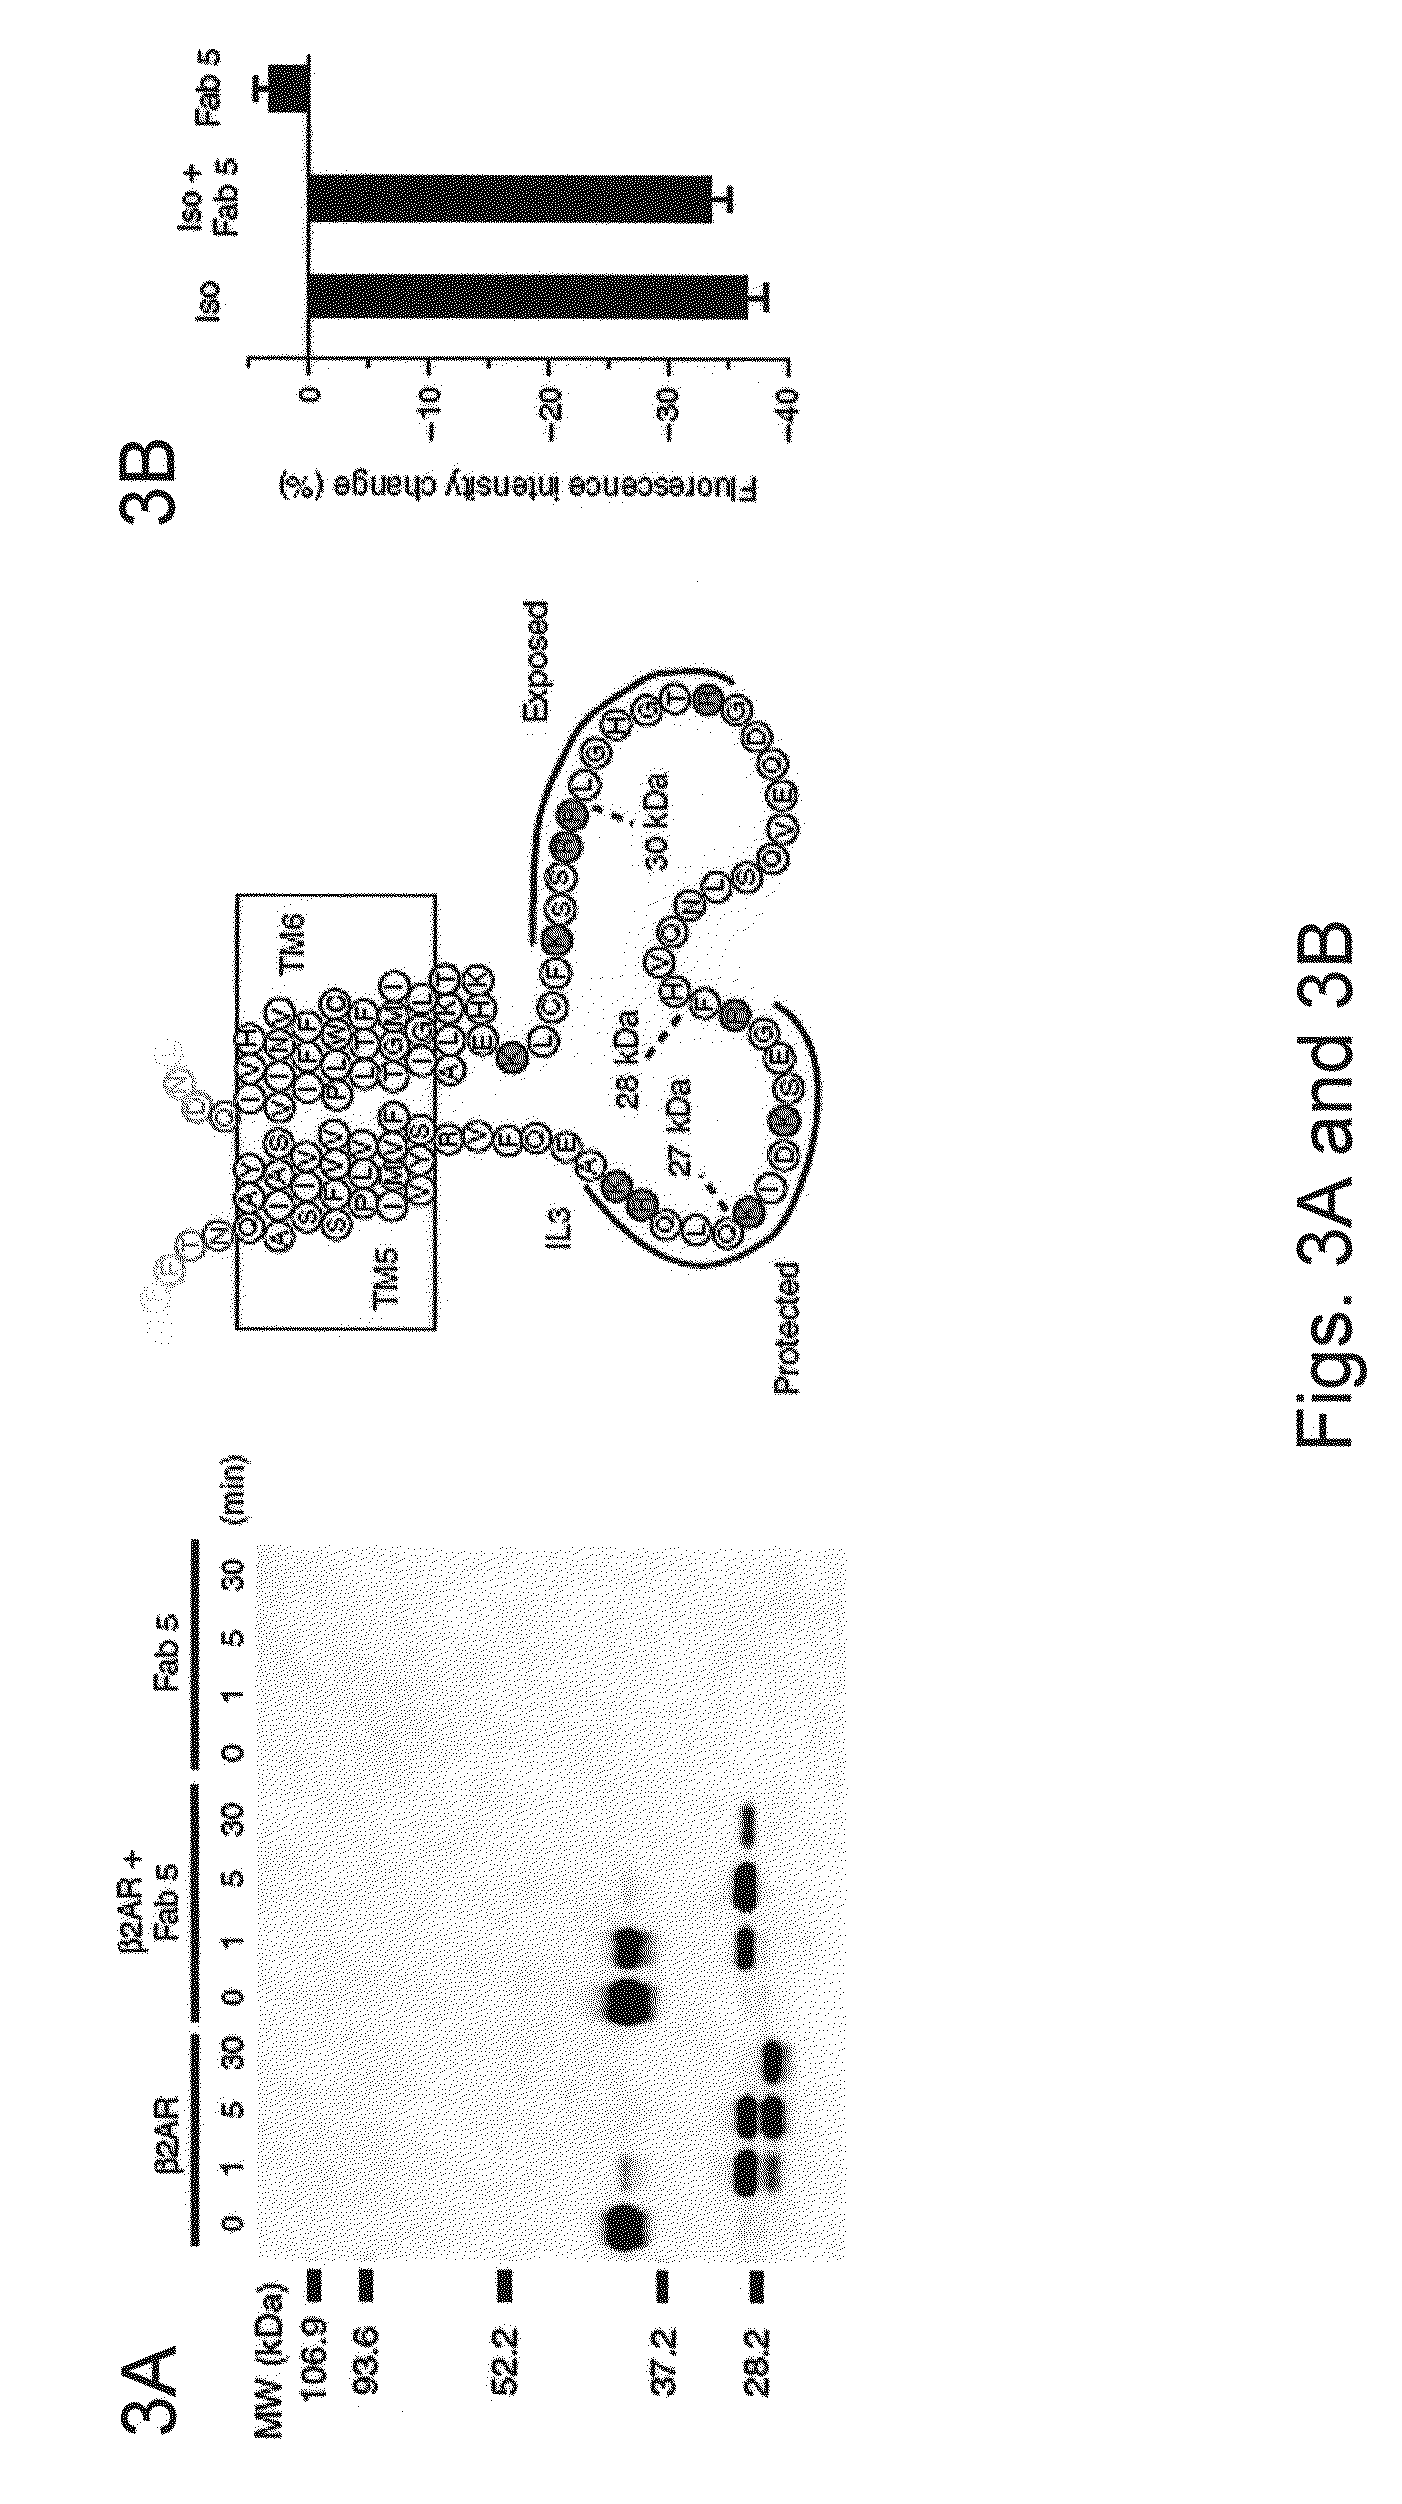 Method for obtaining G protein-coupled receptor (GPCR) diffraction-quality crystals employing a monoclonal antibody that binds to the third intracellular loop (IL3)